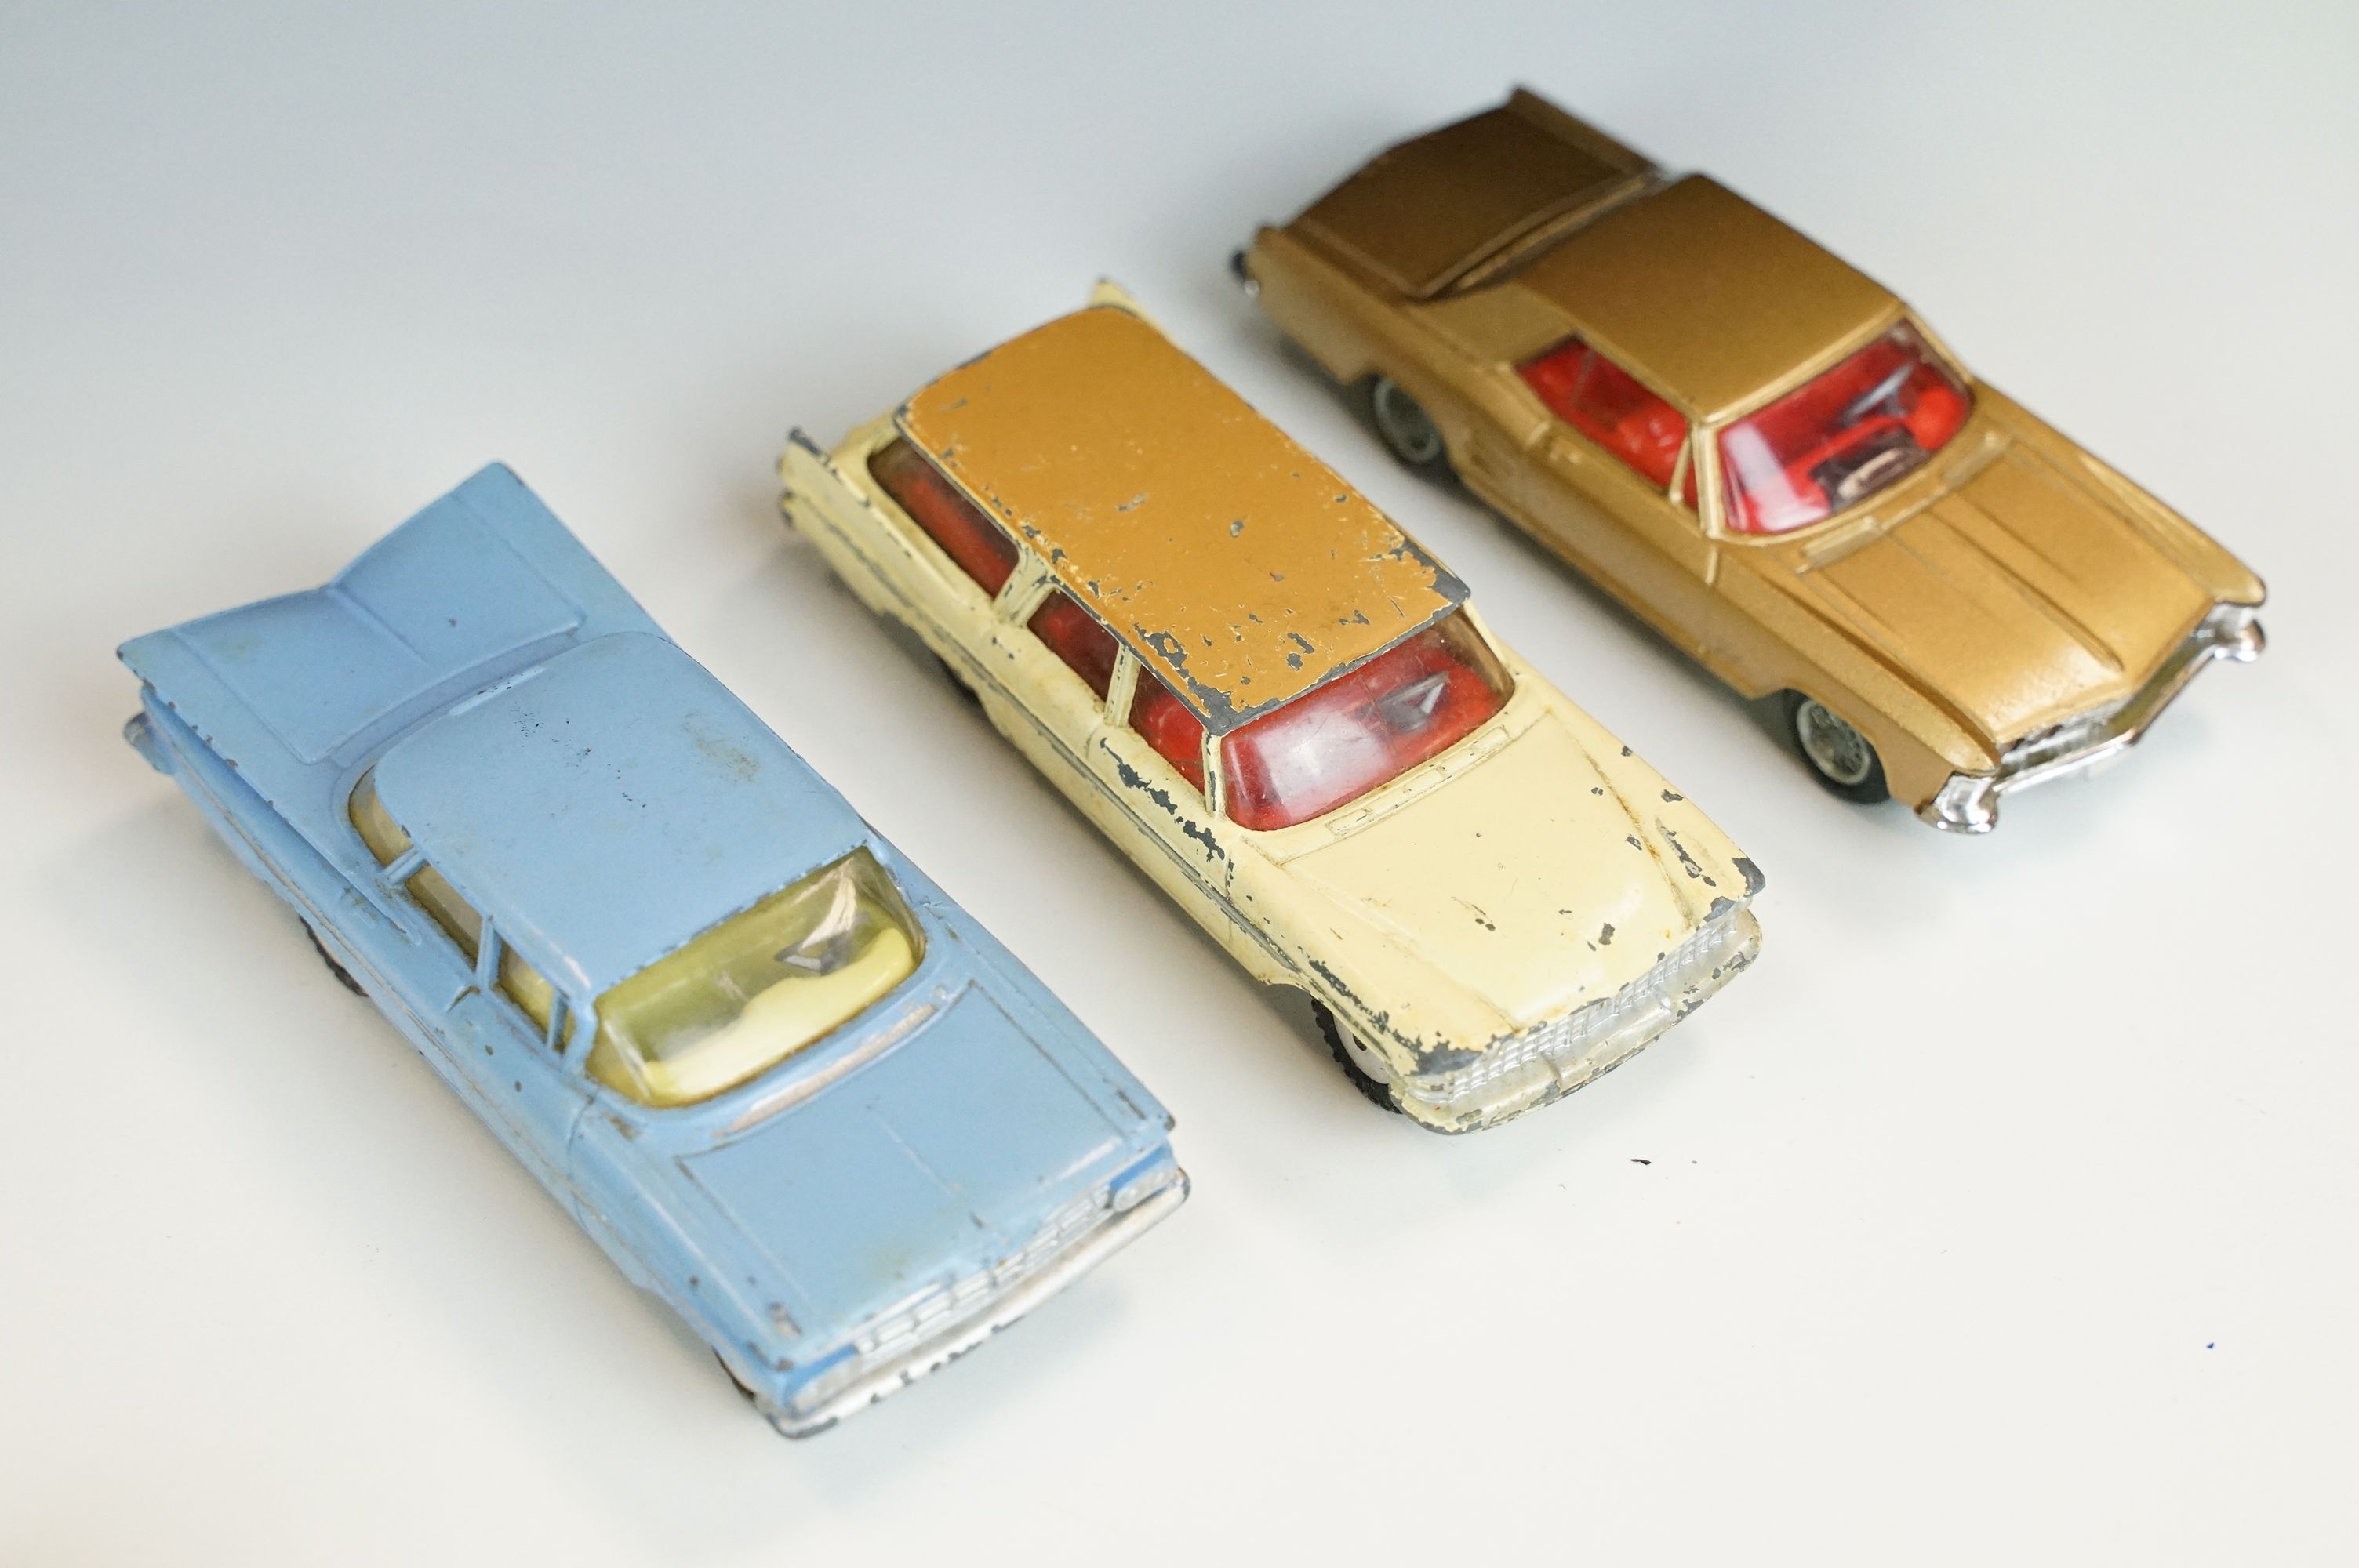 35 Mid 20th C play worn diecast models to include Dinky, Triang & Corgi examples, featuring Triang - Image 5 of 13